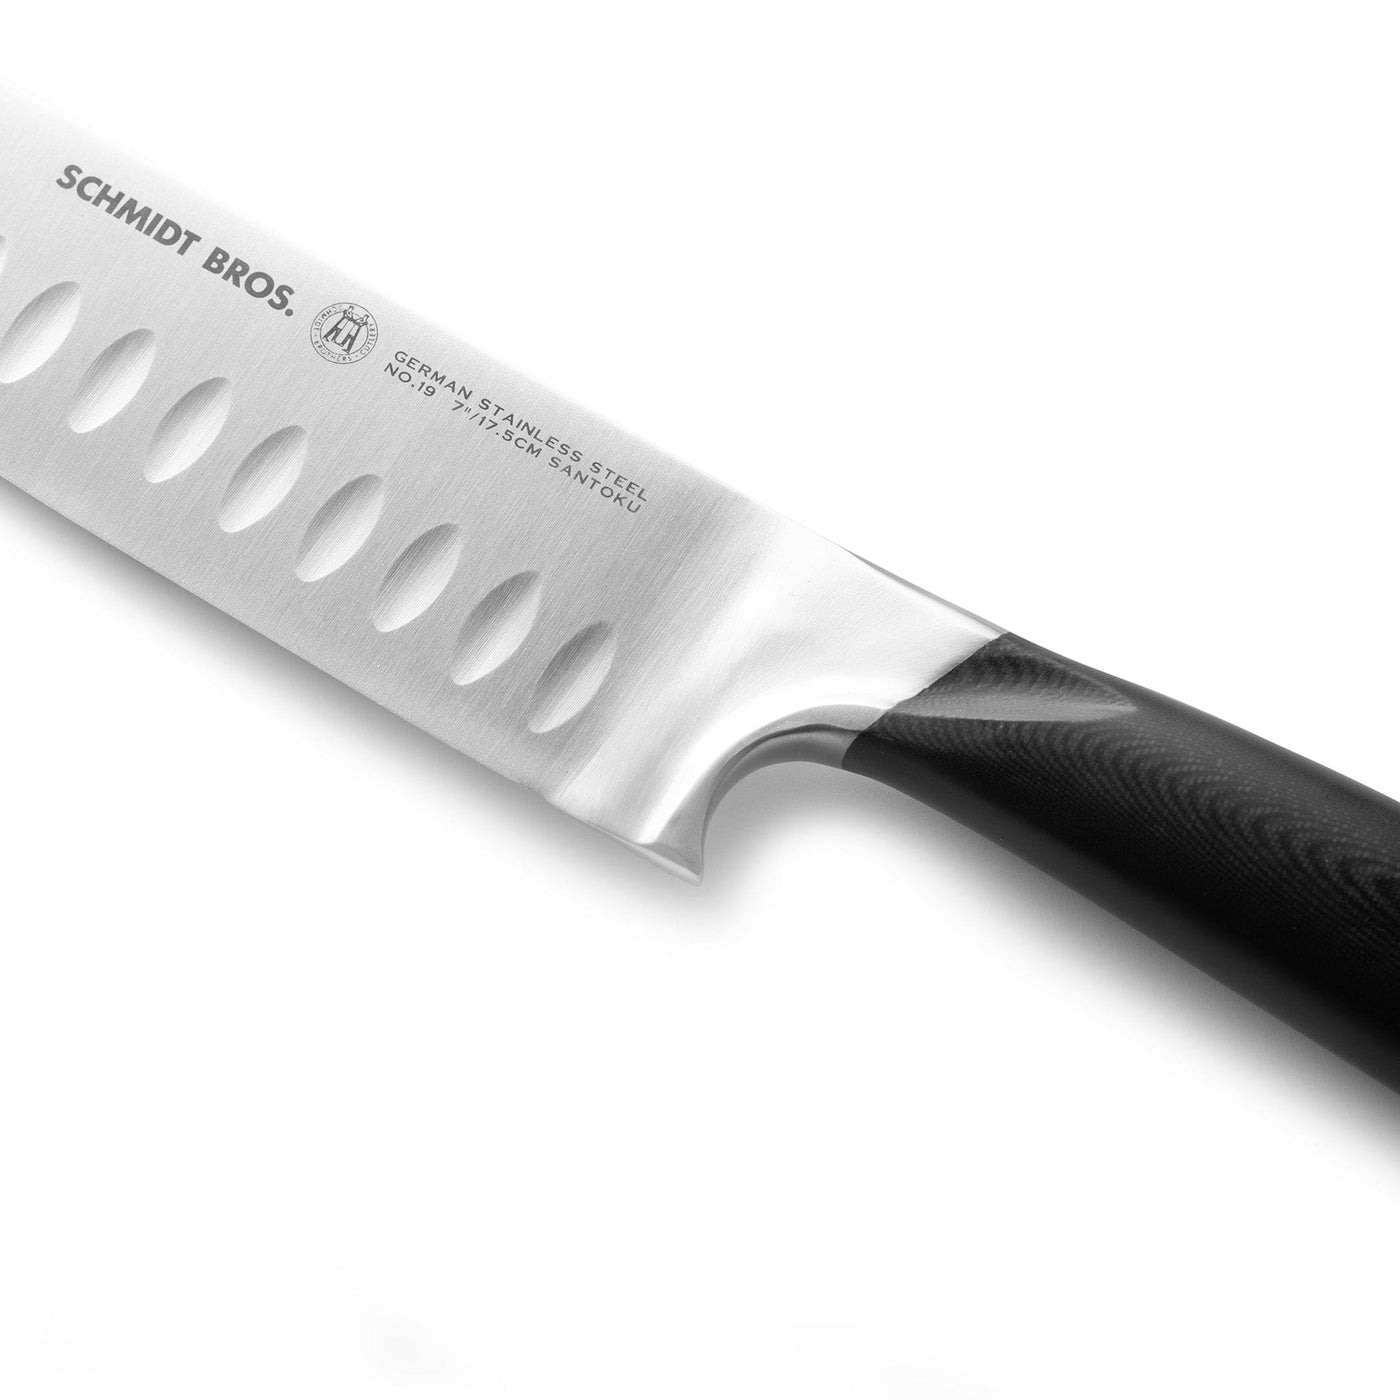 https://schmidtbrothers.com/cdn/shop/files/schmidt-brothers-kitchen-cutlery-schmidt-brothers-heritage-series-12-piece-knife-set-high-carbon-stainless-steel-cutlery-and-acrylic-magnetic-knife-block-30743378329661_1400x.jpg?v=1684153896